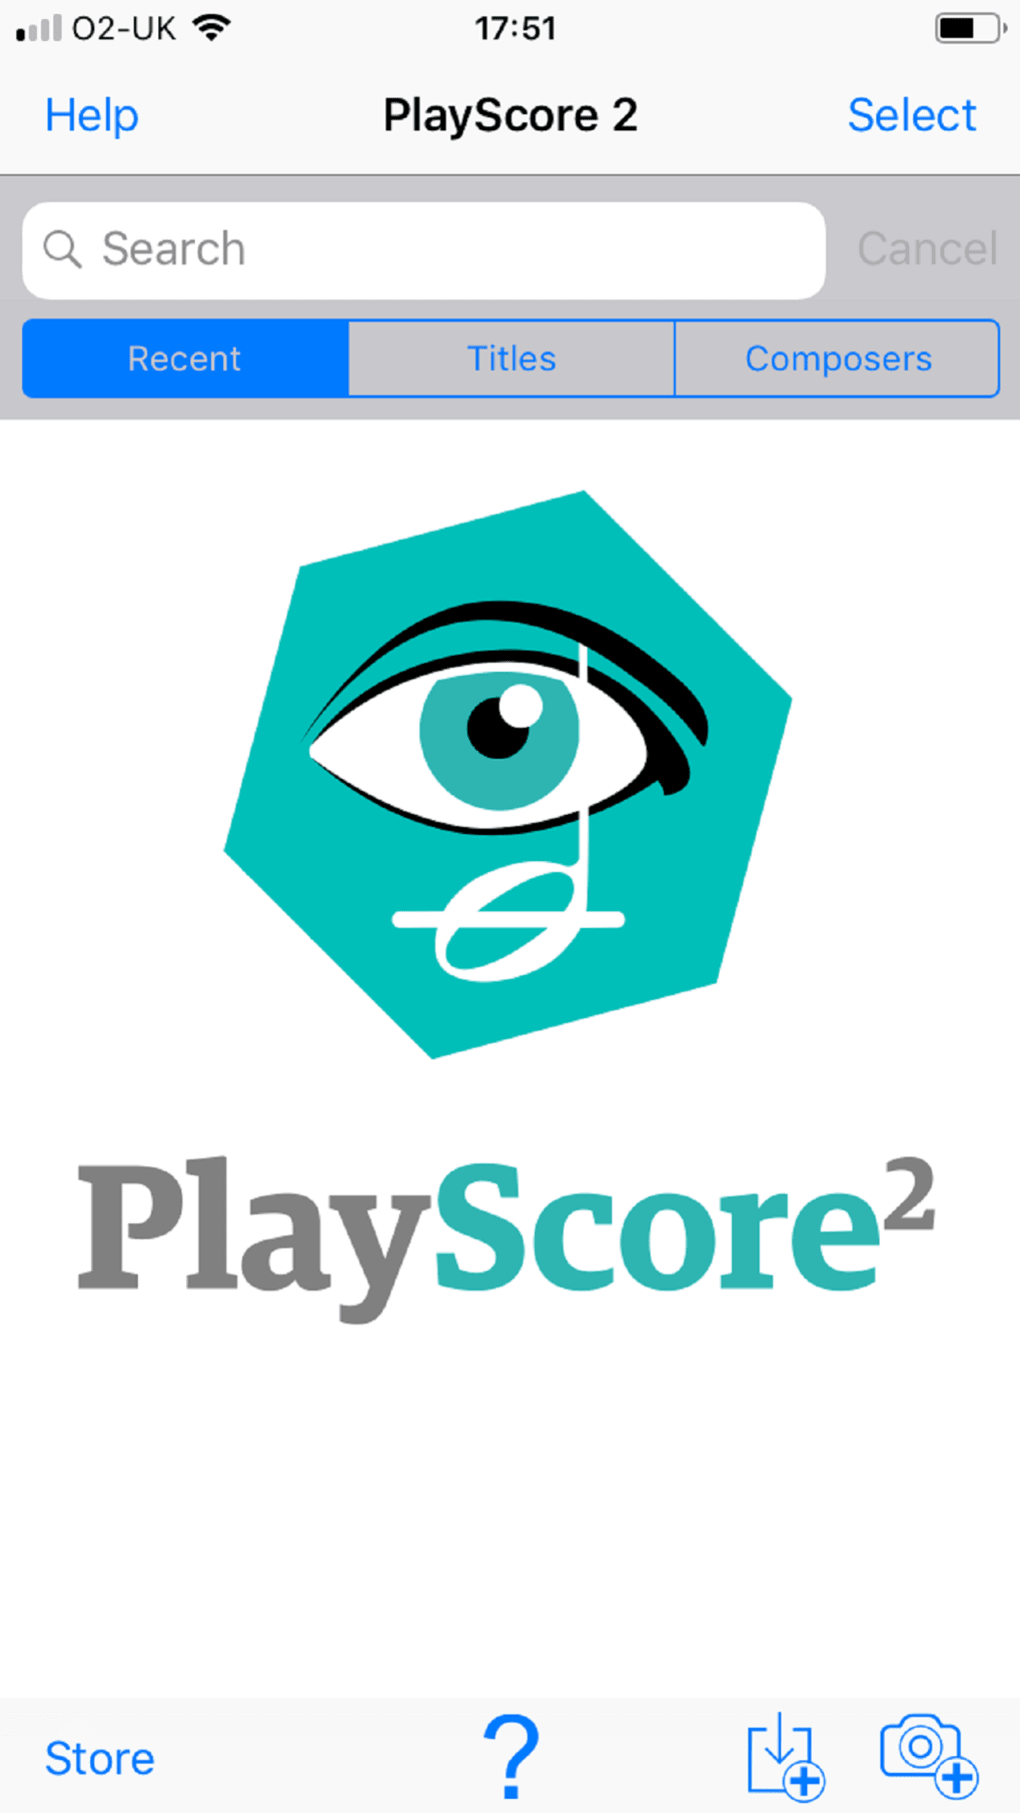 PlayScore For Windows Help - PlayScore